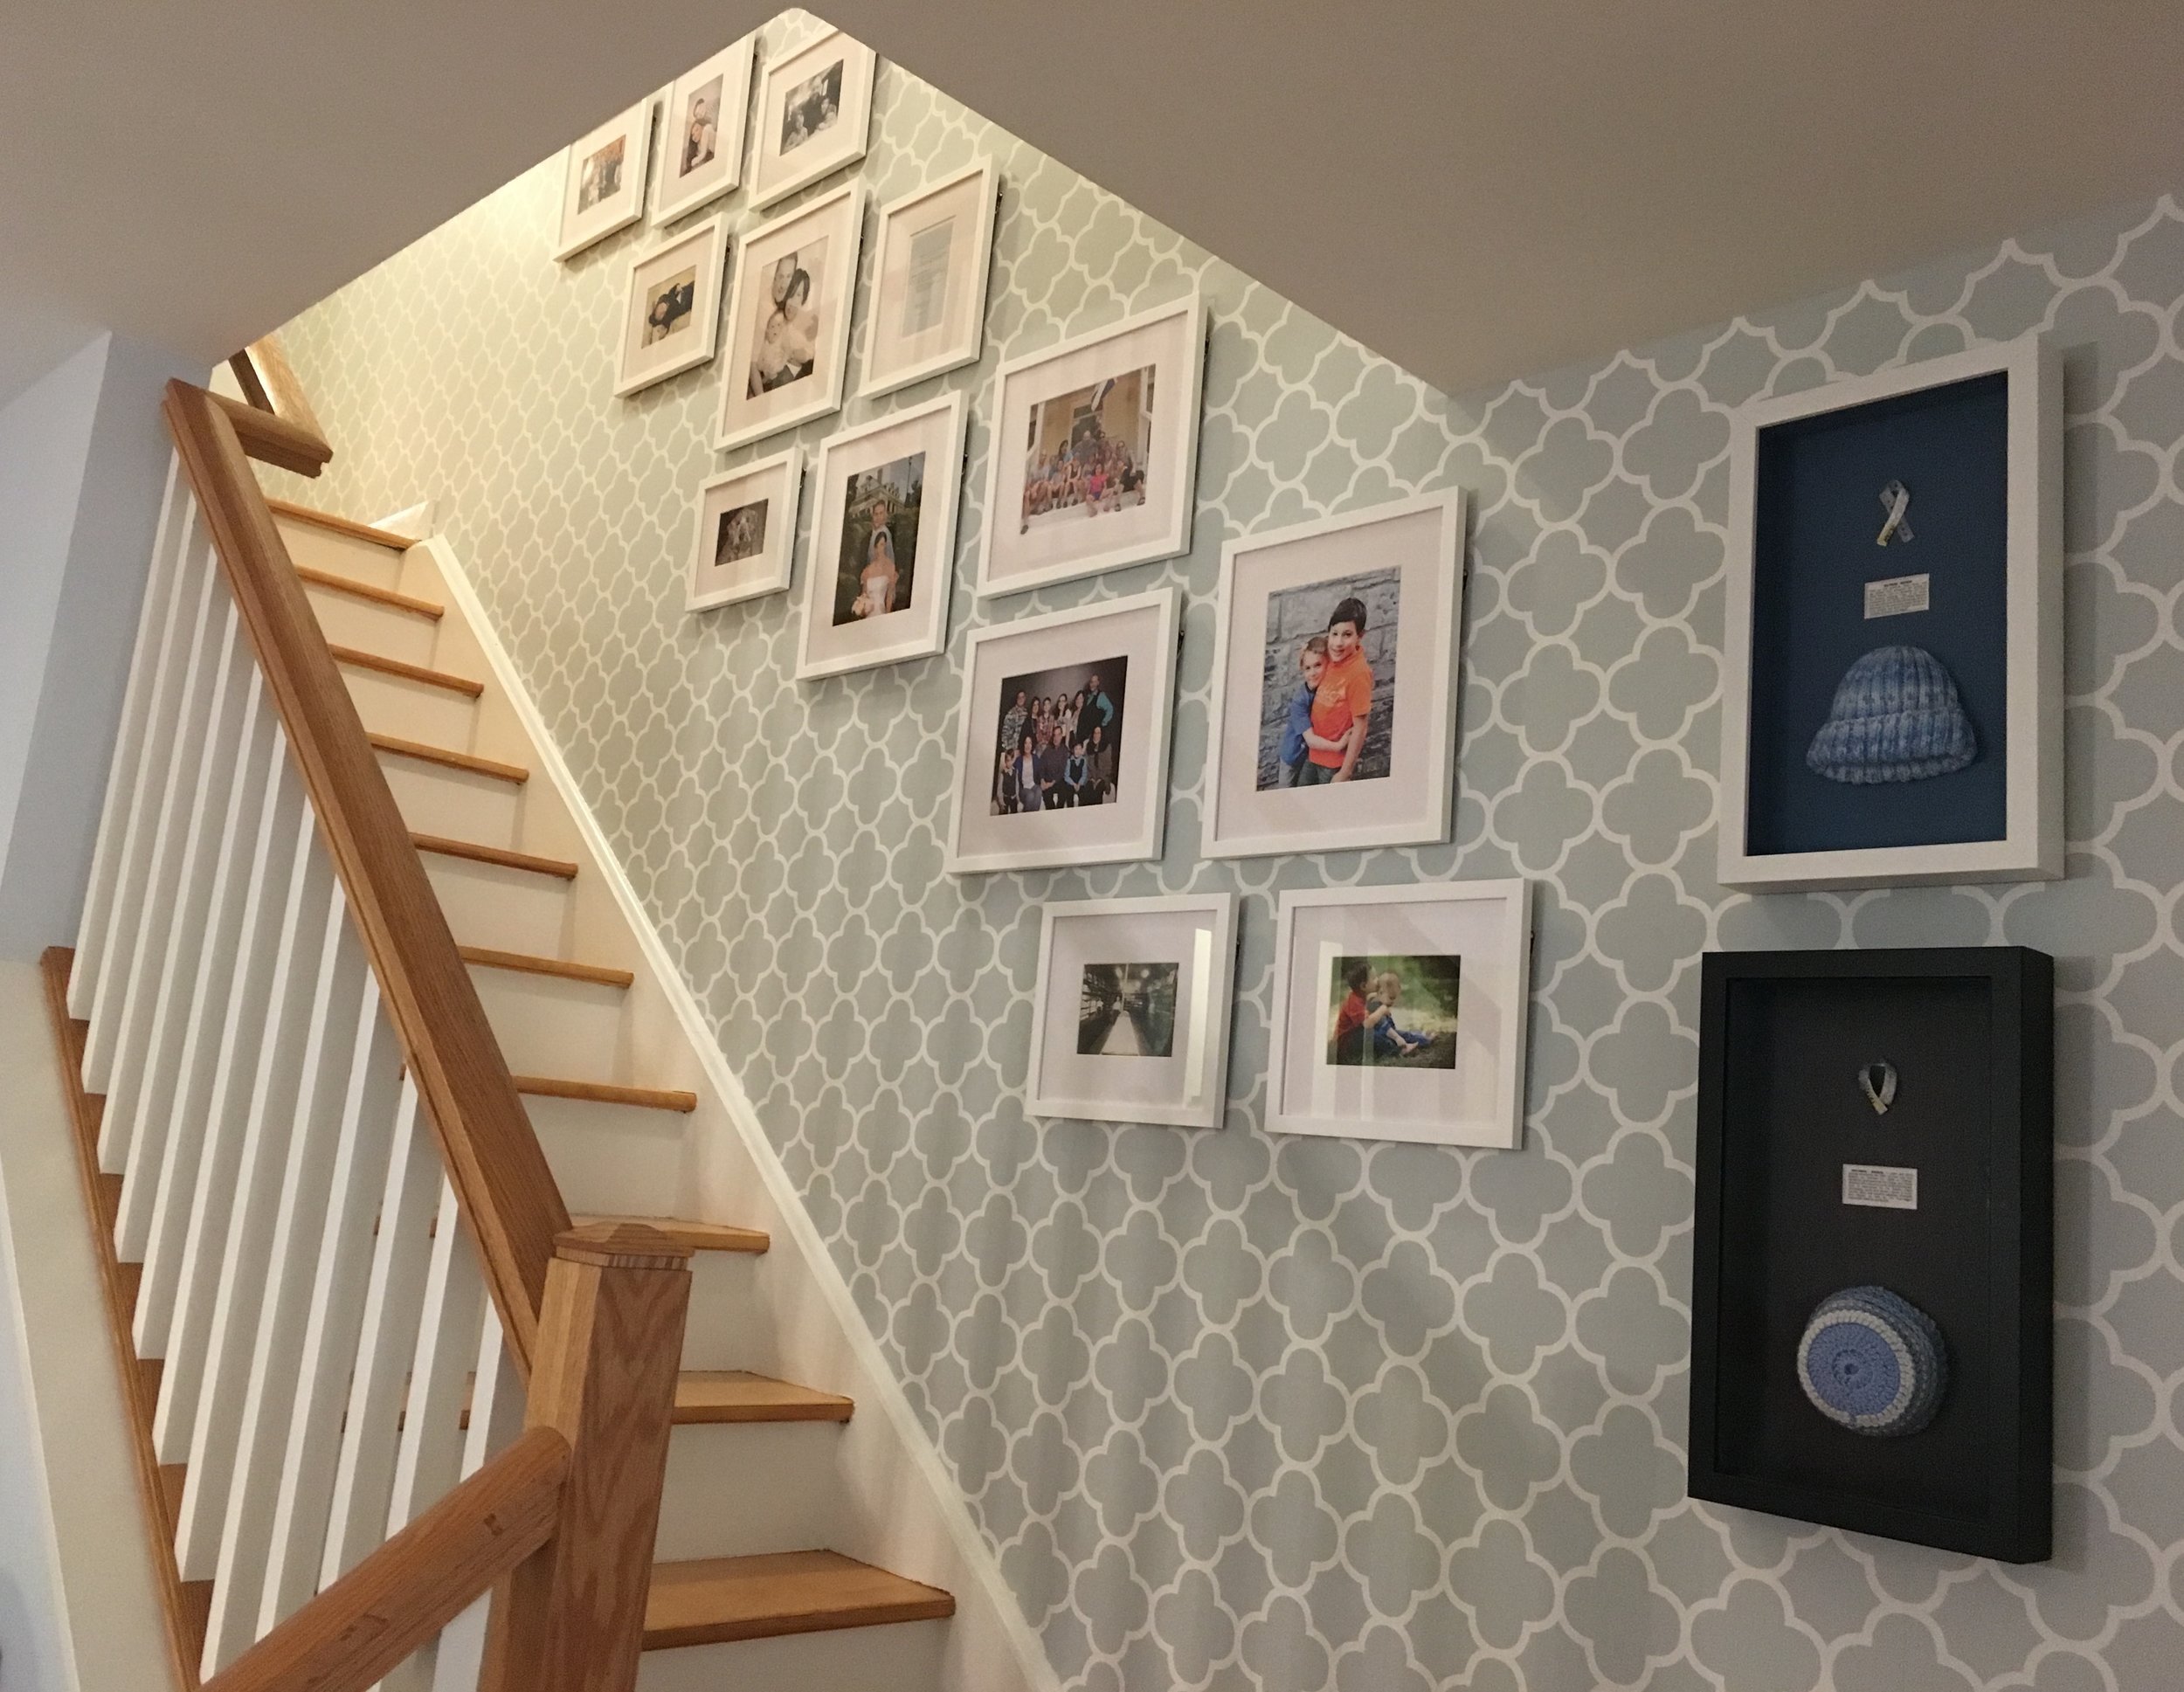 Framed family portraits going up the staircase